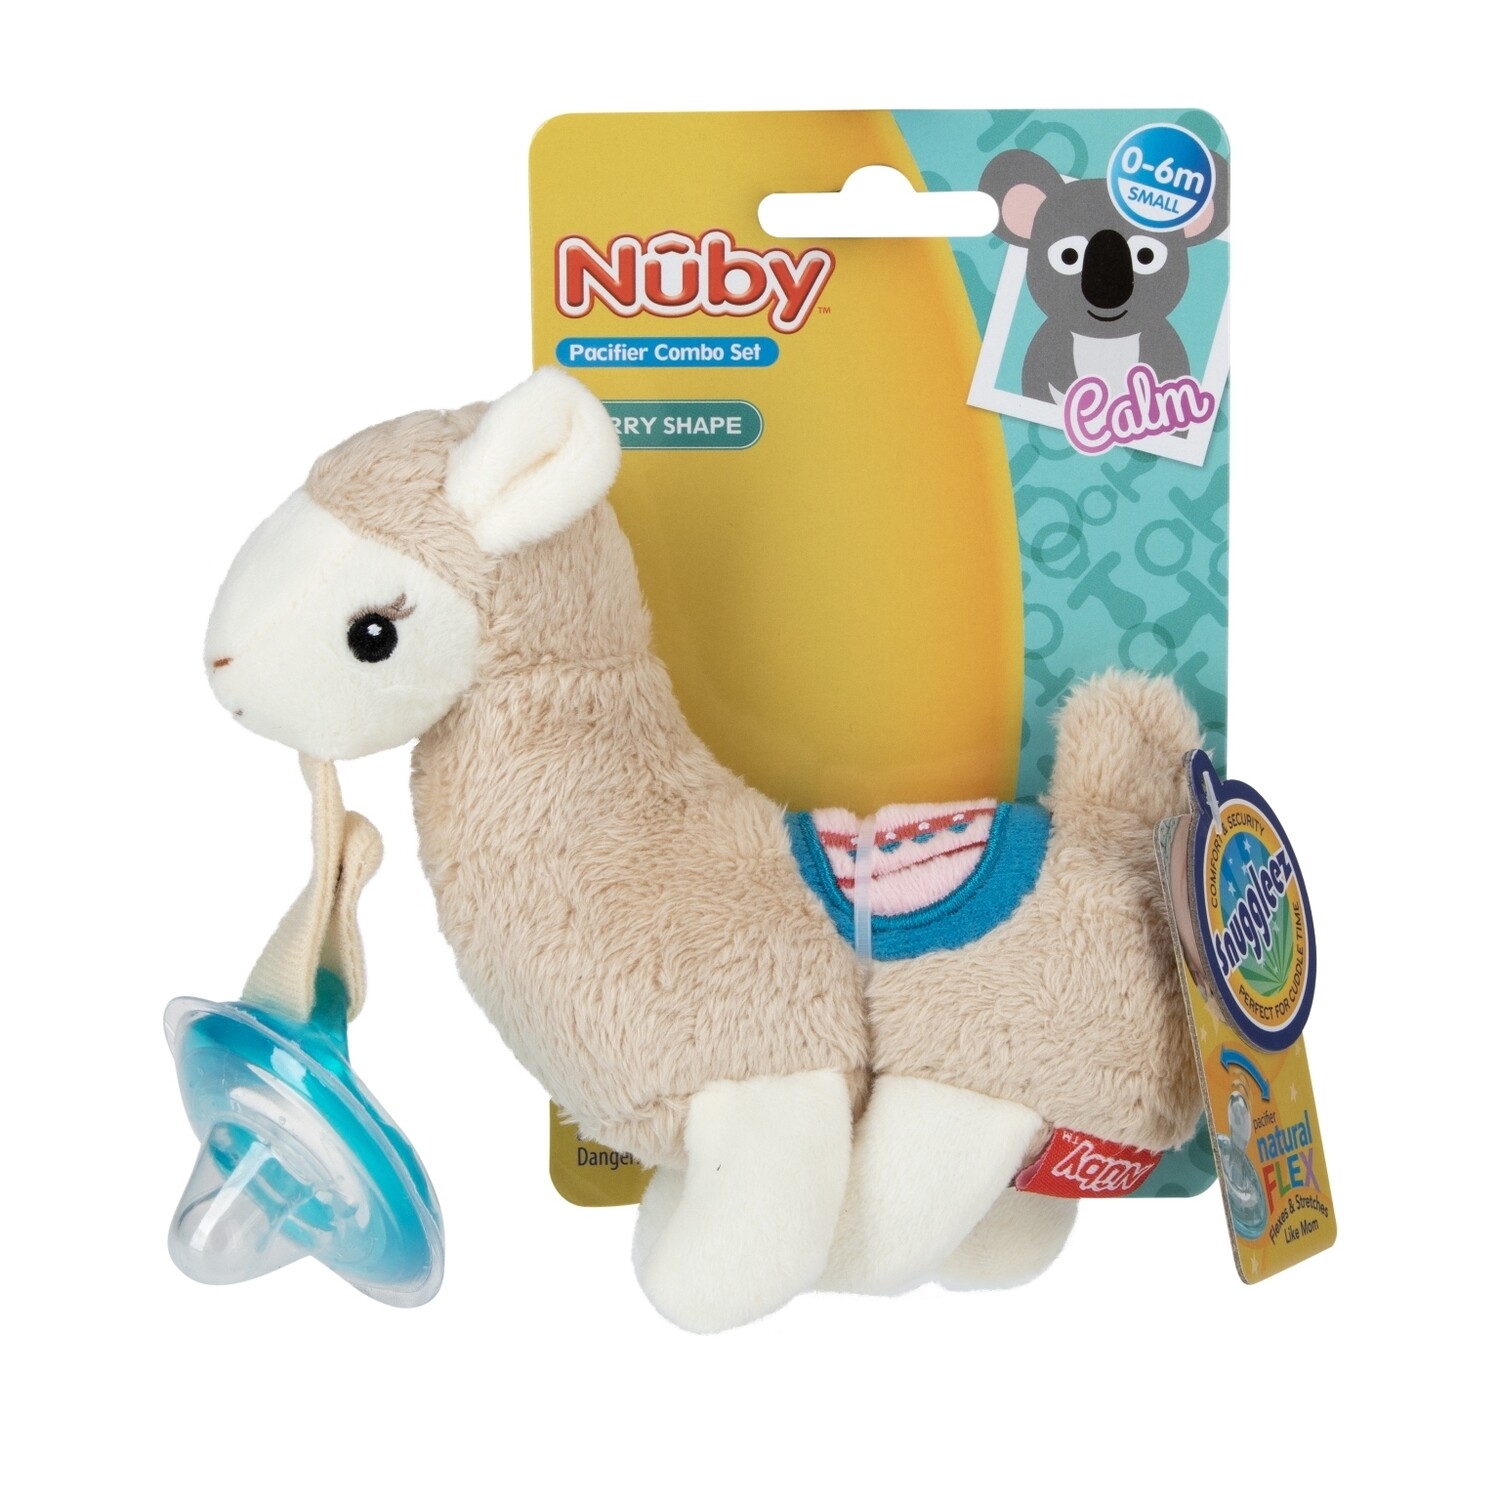 . Case of [12] Nuby Plush Pacifinders - Llama, 0-6M, Natural Cherry Shape .